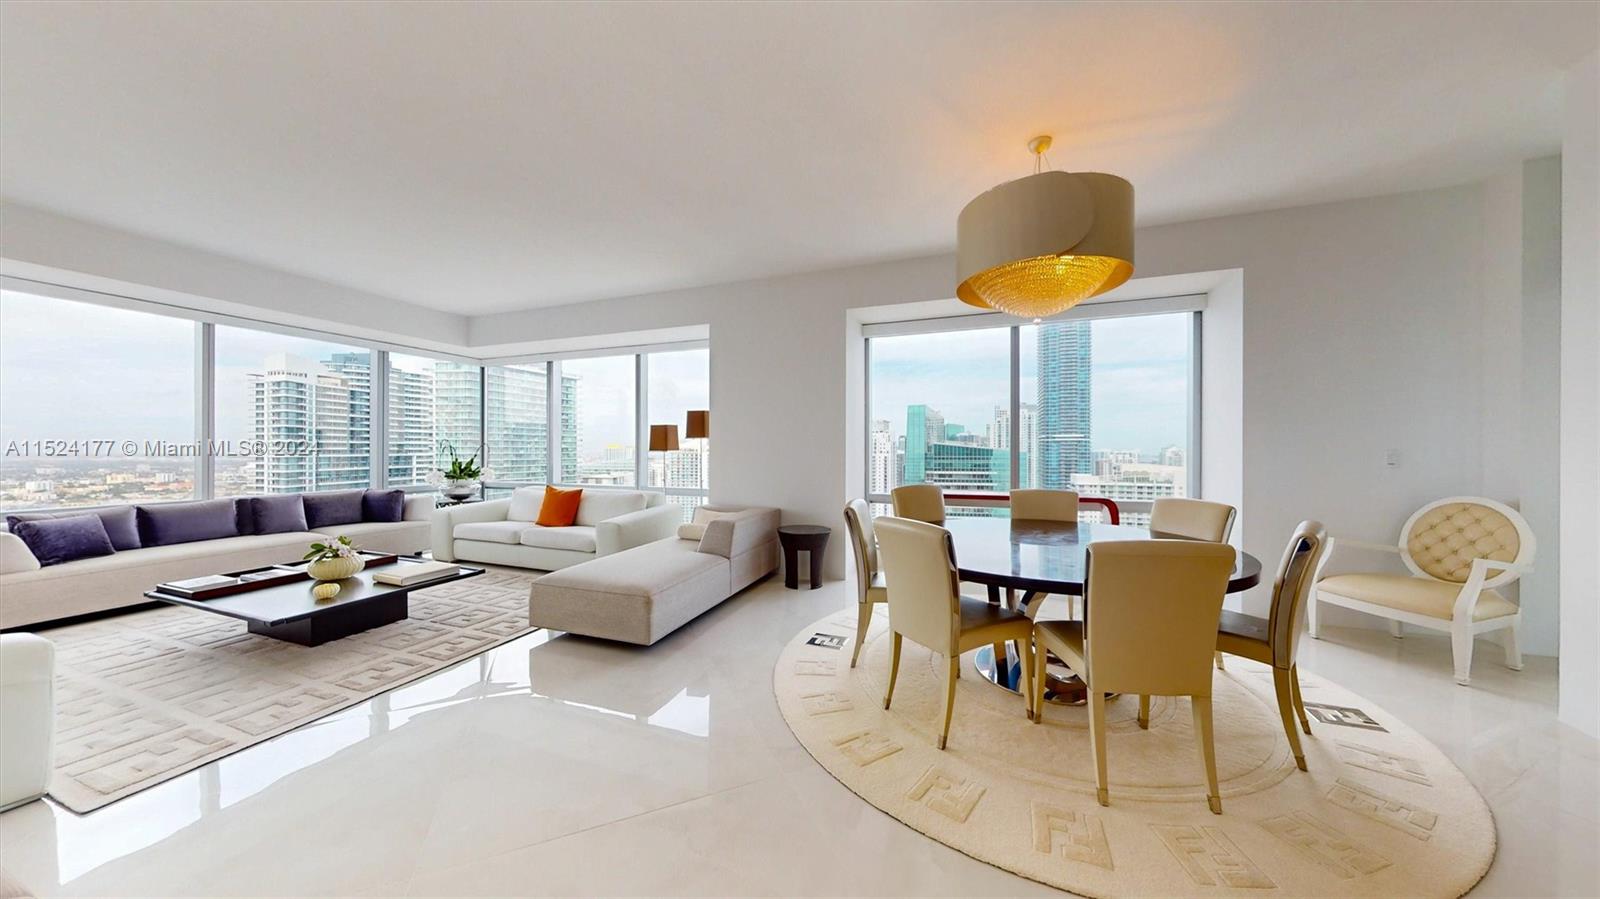 Stunning two-bedroom, 2.5-bathroom residence in the renowned Four Seasons on Brickell! Unbelievable vistas enhance the allure of this unit. Crafted for those with discerning tastes, it boasts luxurious finishes and captivating views.

Experience unparalleled luxury at Four Seasons Residences, Miami. These exquisite homes redefine urban living with breathtaking city views, high-end finishes, and top-notch amenities. Enjoy the convenience of a Sports Club, spa, pools, renowned restaurants, concierge, valet, and personal storage. Elevate your lifestyle in the heart of Miami's vibrant scene.

Flooring and Bathrooms were completely renovated.  New induction Miele stove, range hood, and wine coller.  Sub-zero fridge with Viking dual oven.